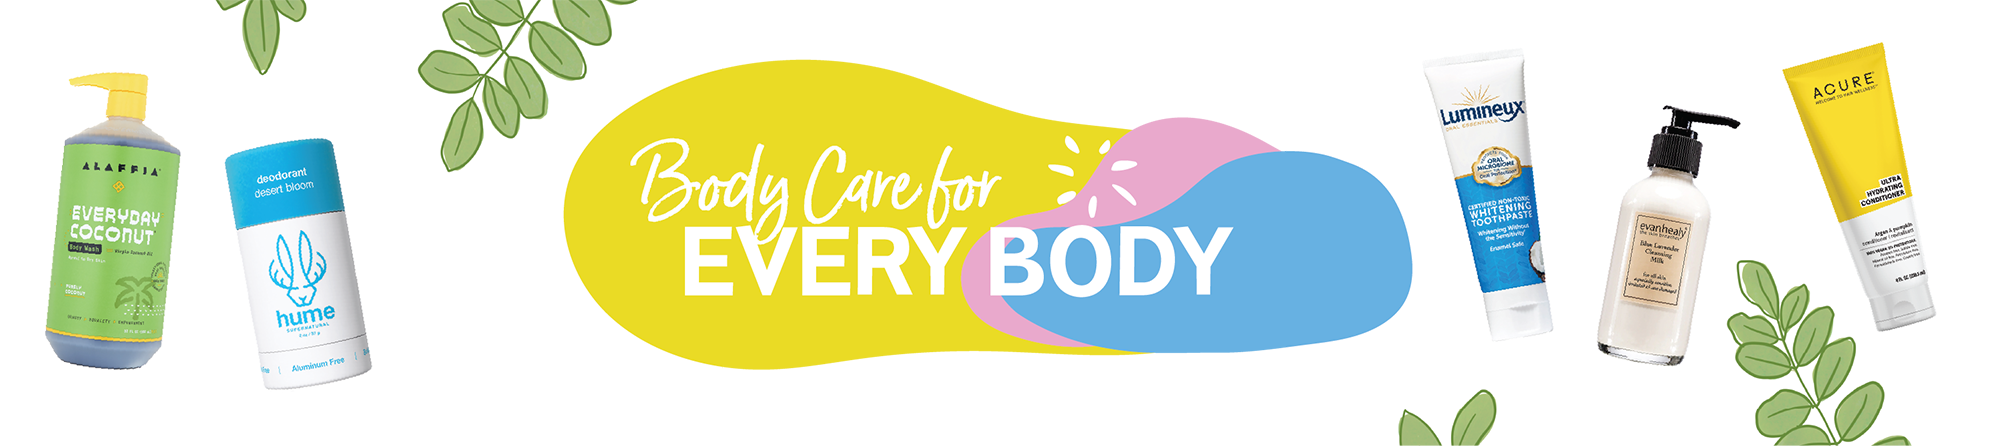 body care for every body